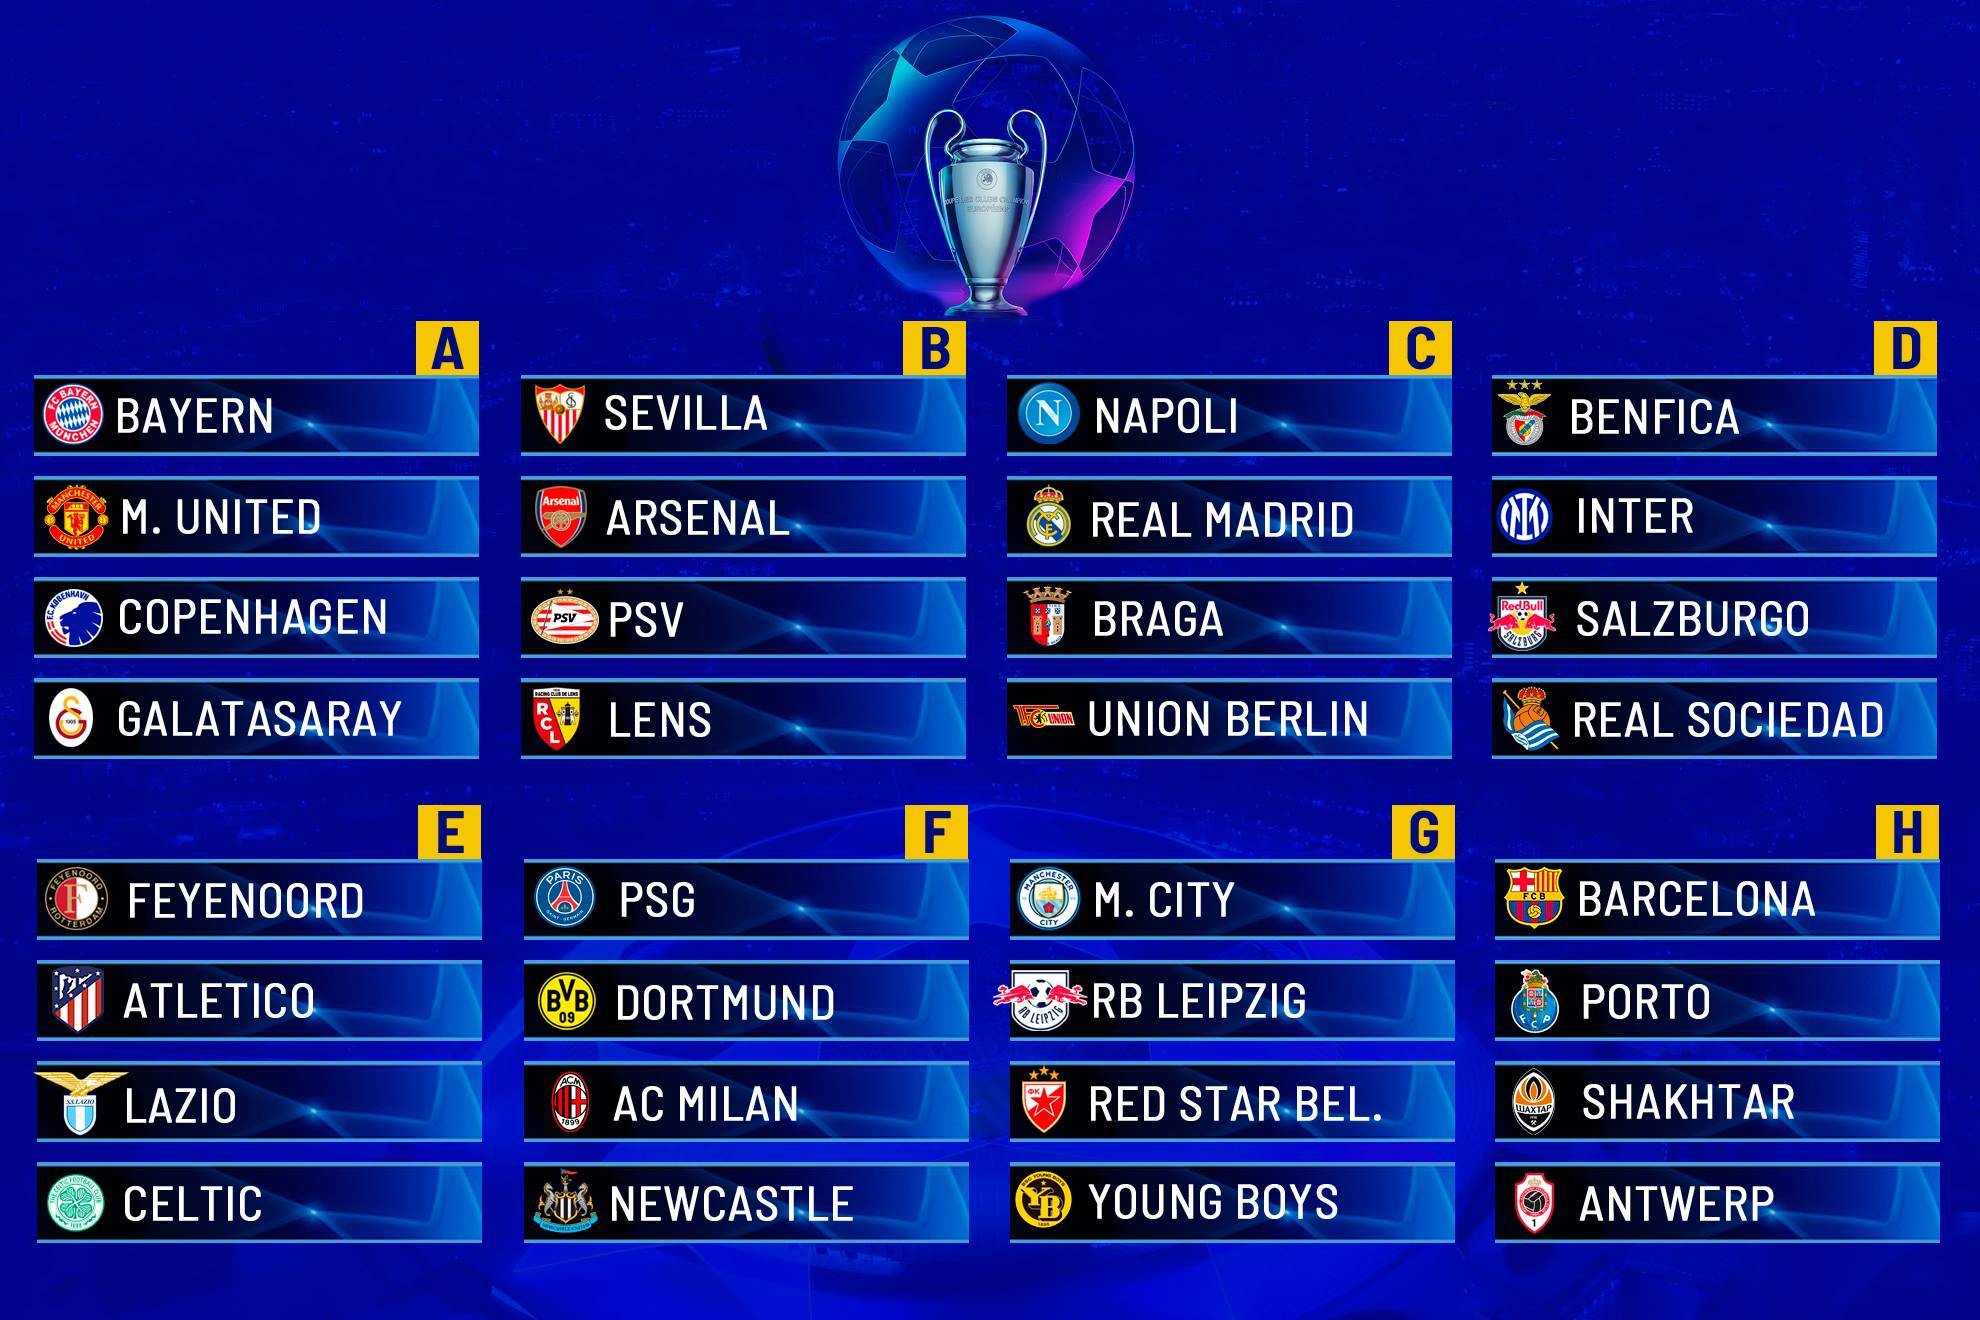 The Champions League groups